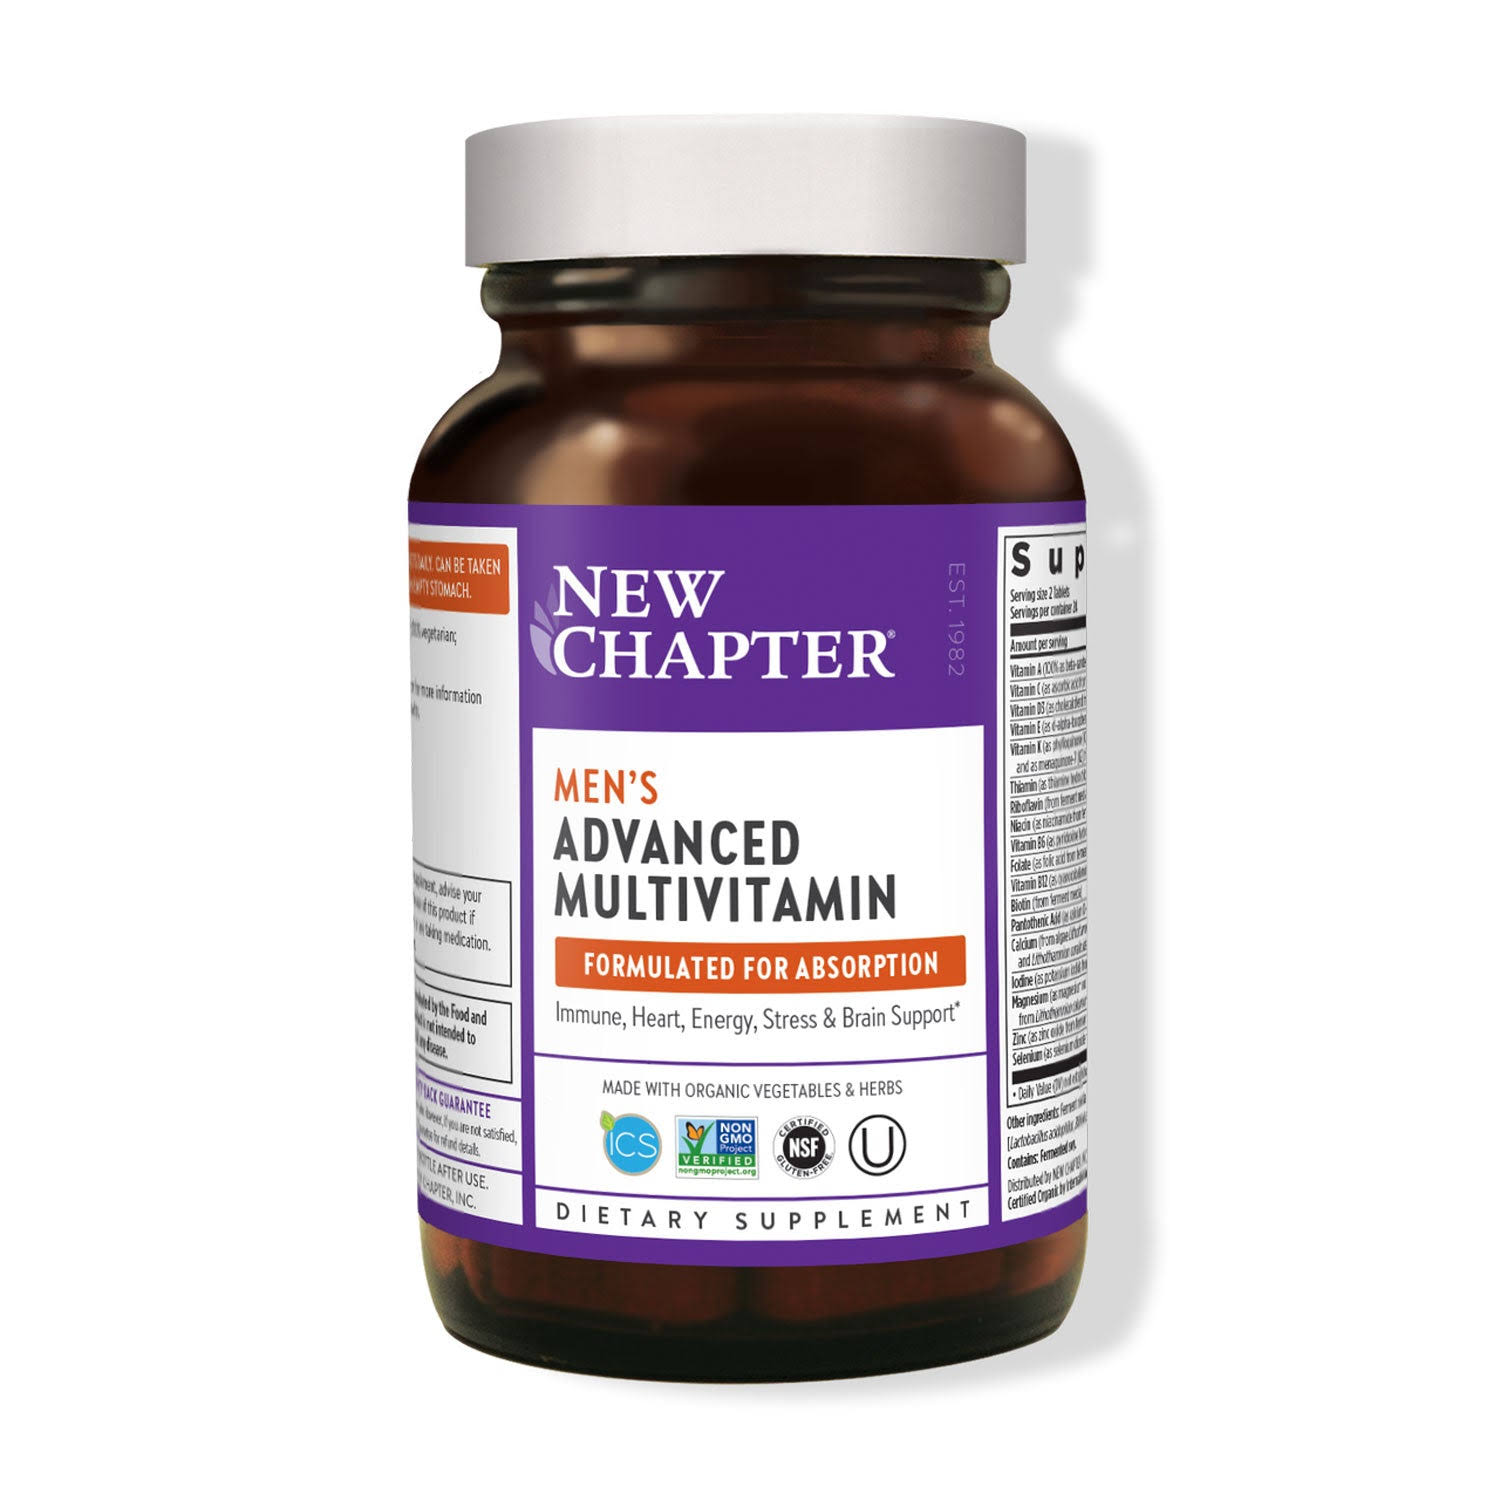 New Chapter Every Man Multivitamin - 72 Count